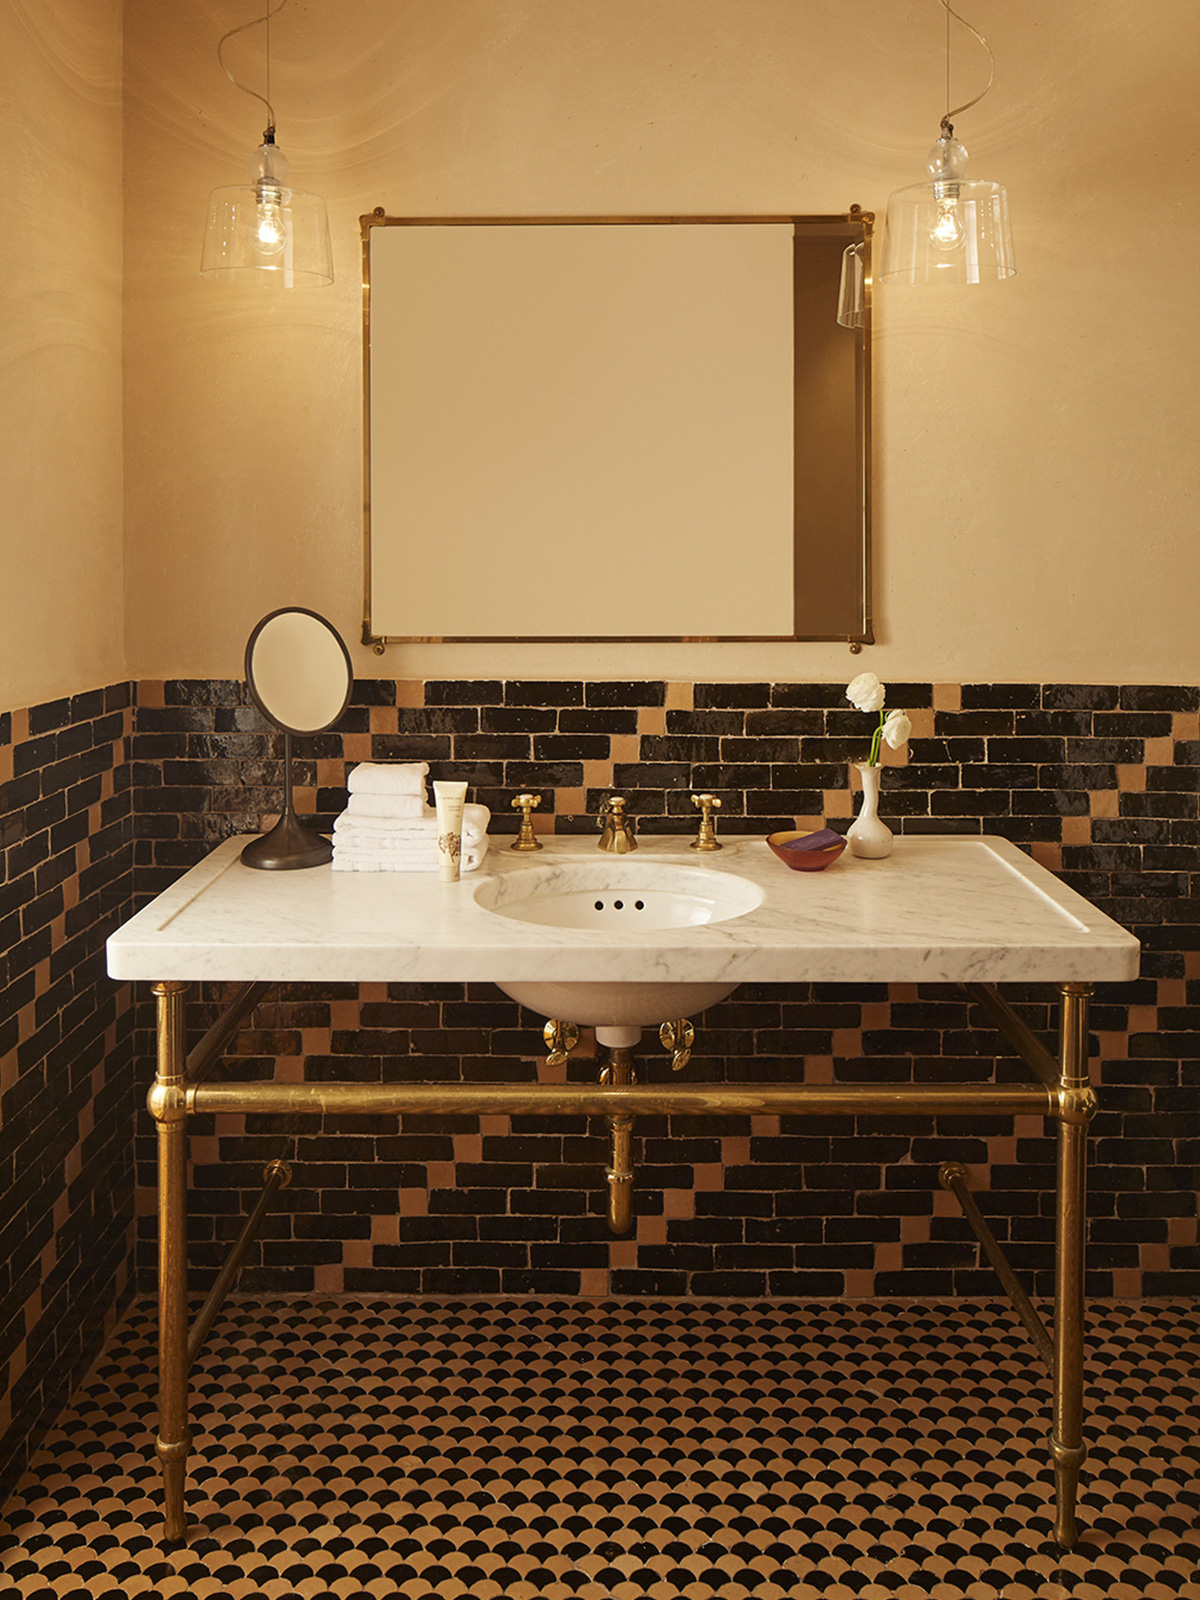 View of the bathroom sink and patterned tile in the Superior King room